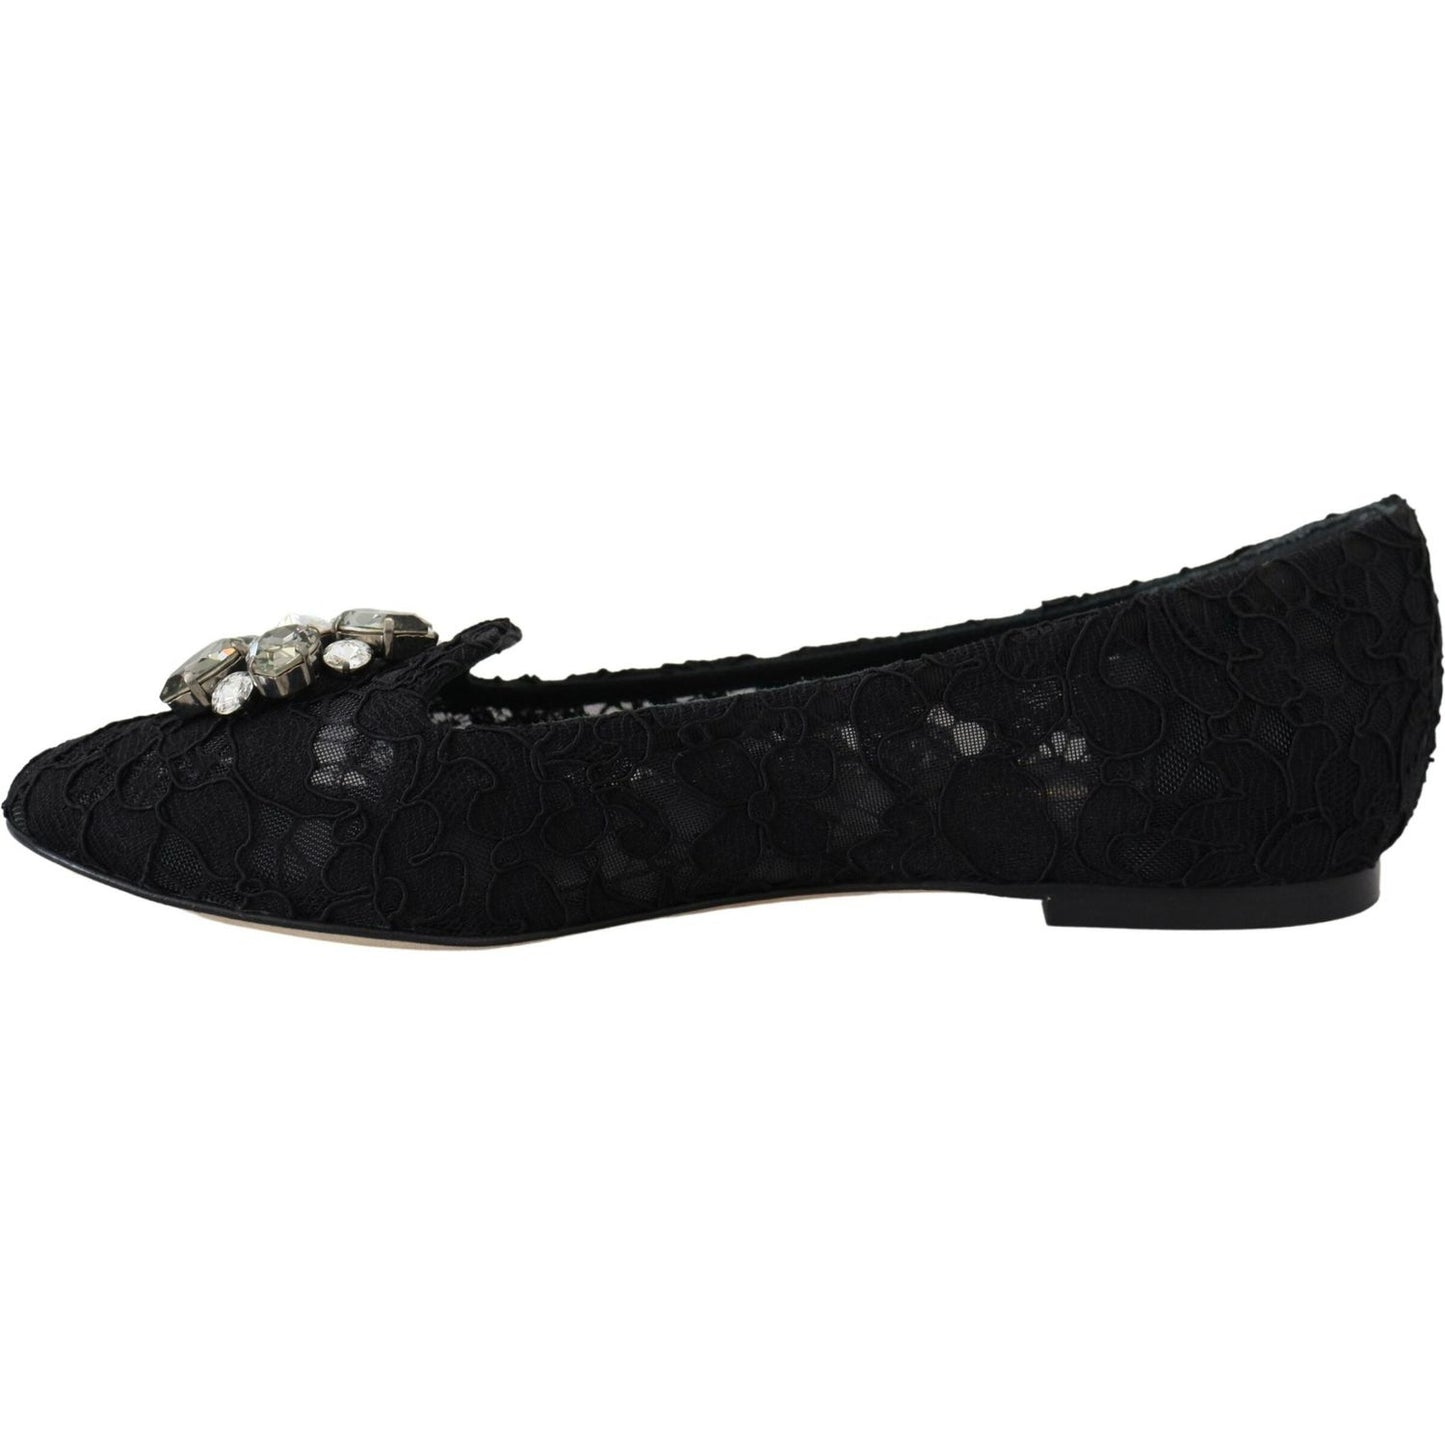 Dolce & Gabbana Elegant Floral Lace Flat Vally Shoes black-taormina-lace-crystals-flats-shoes